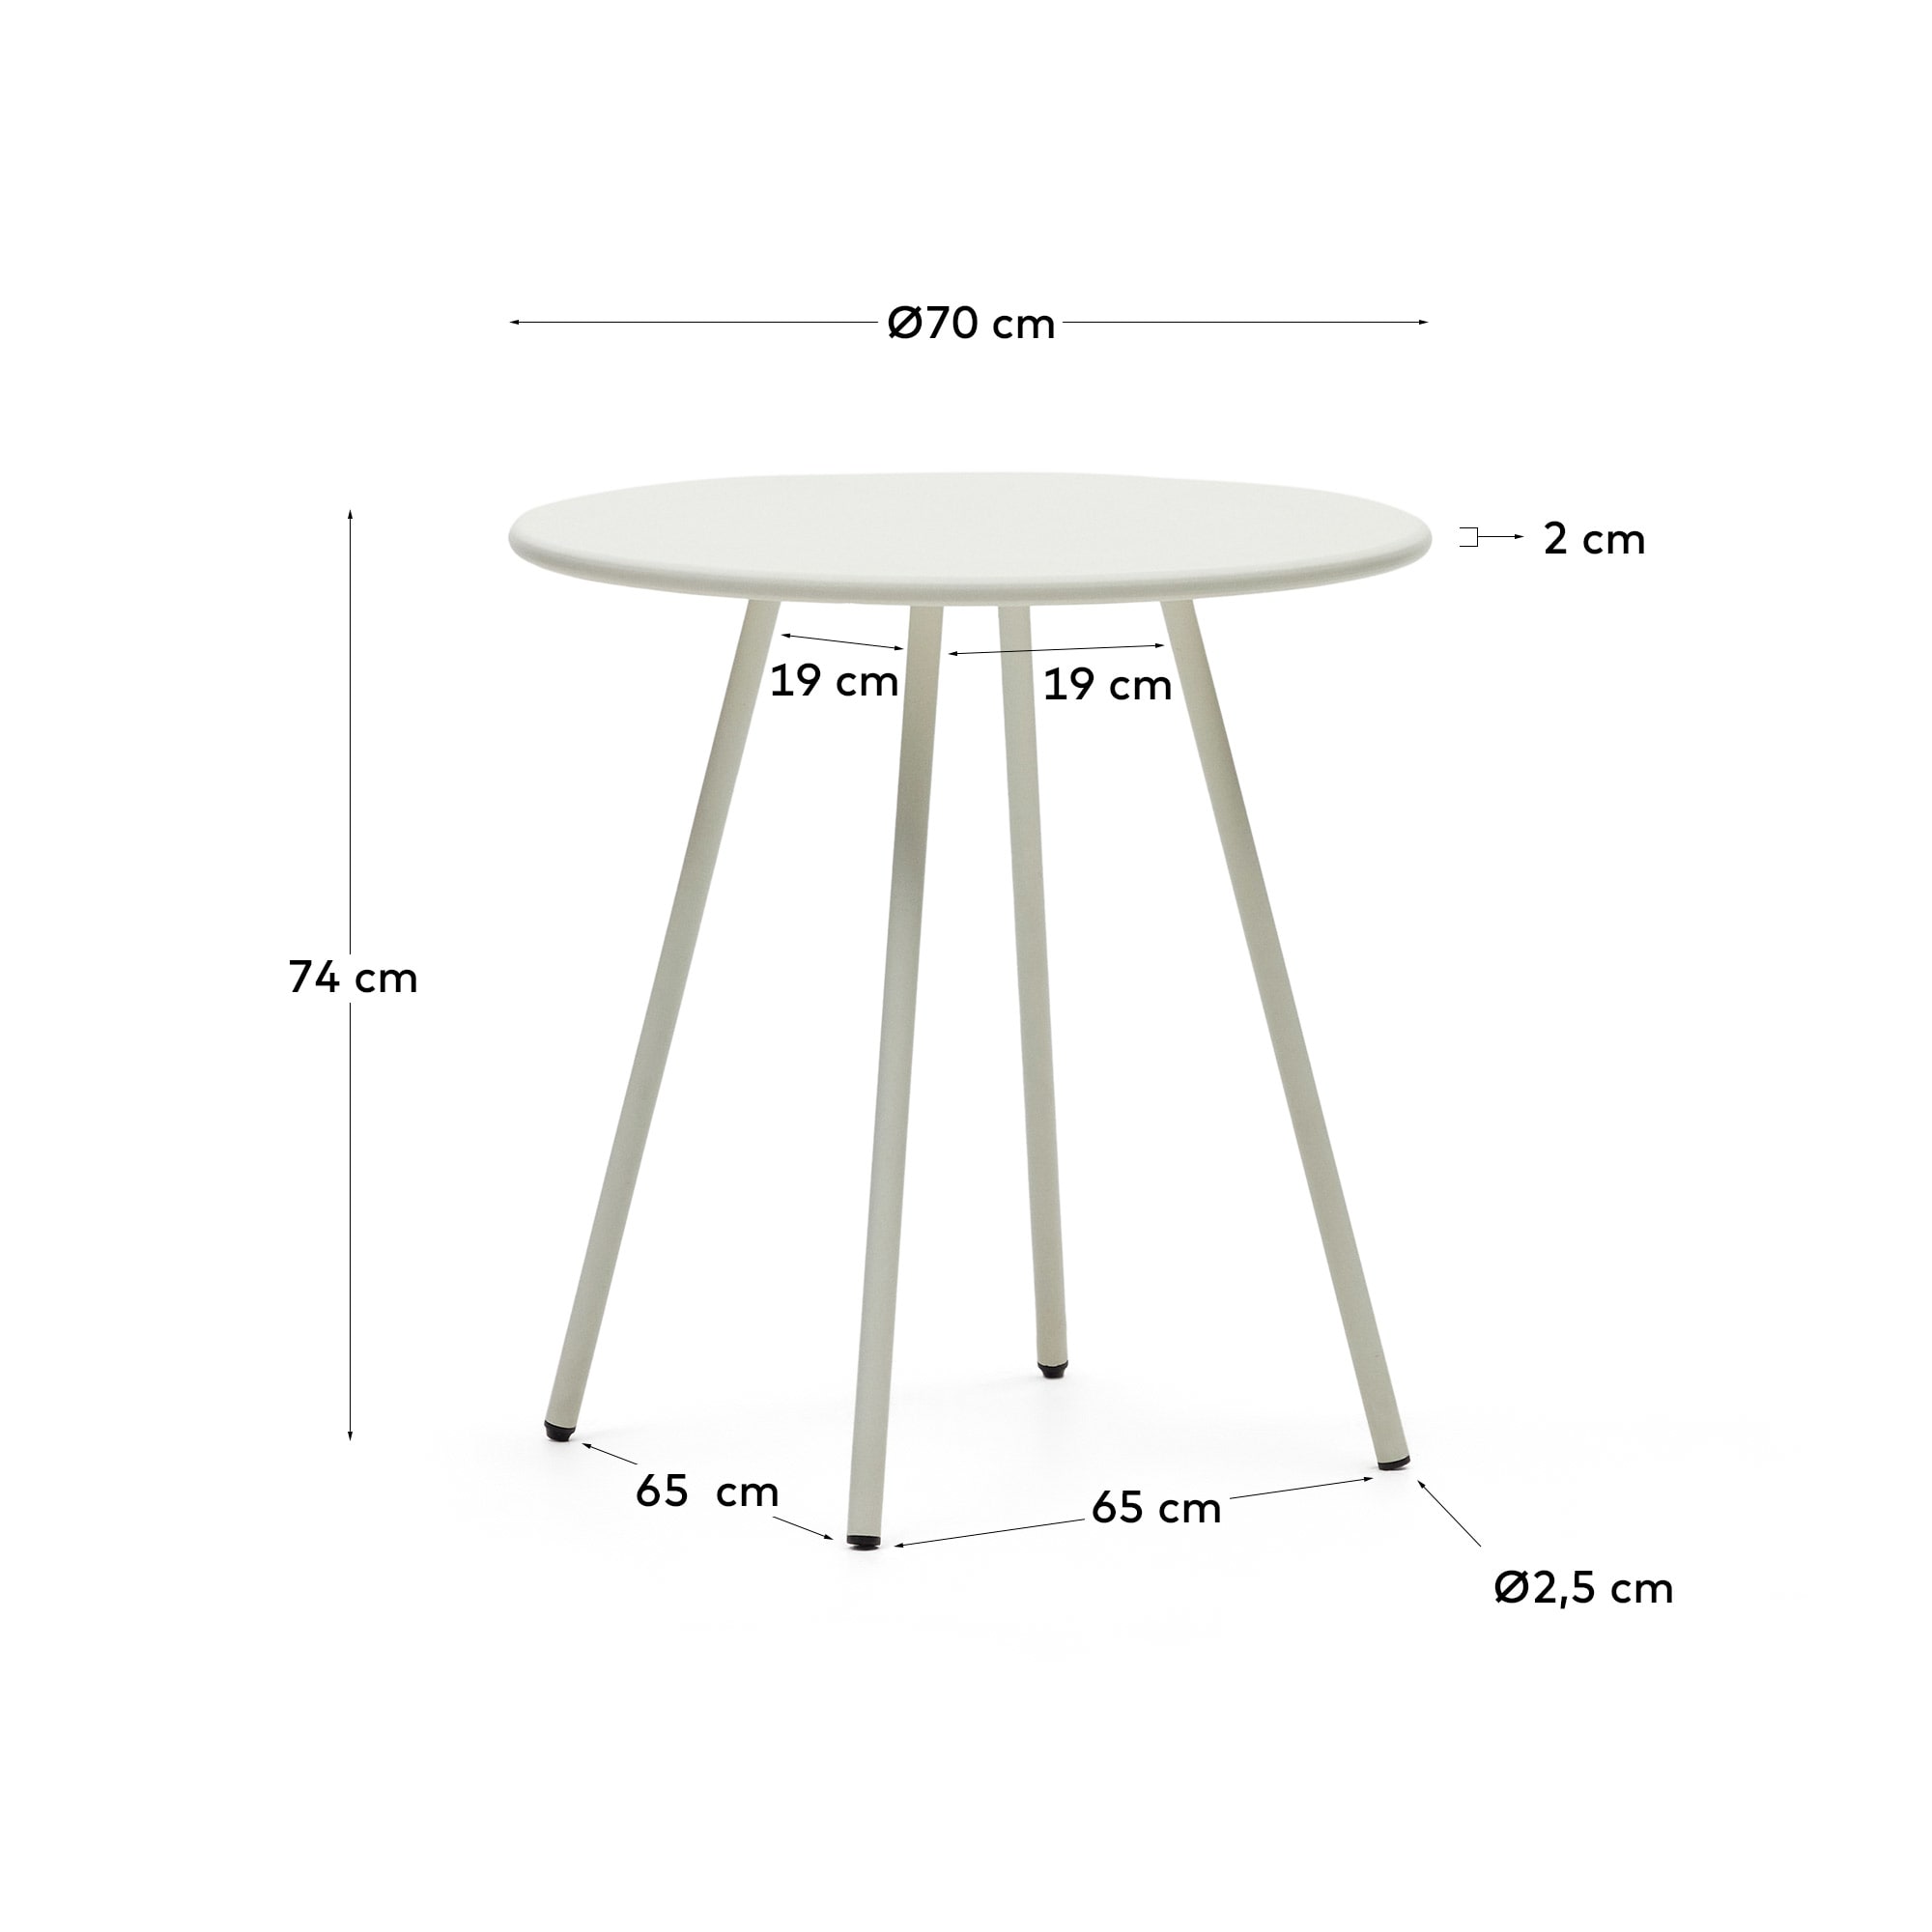 Montjoi round outdoor table in steel with a white finish, Ø 70 cm - sizes